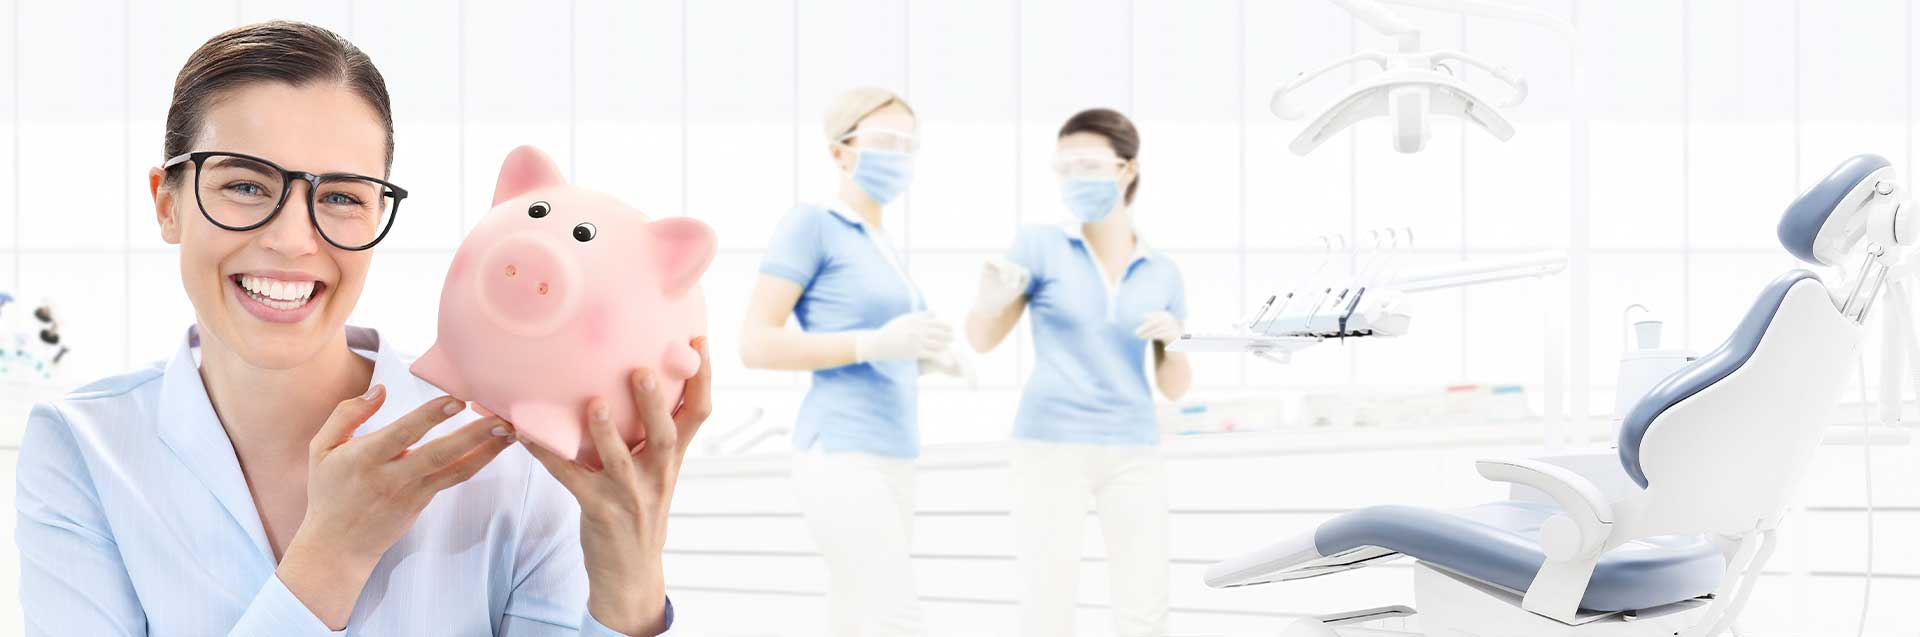 Sale eye examination, woman smiling with spectacles and piggy bank